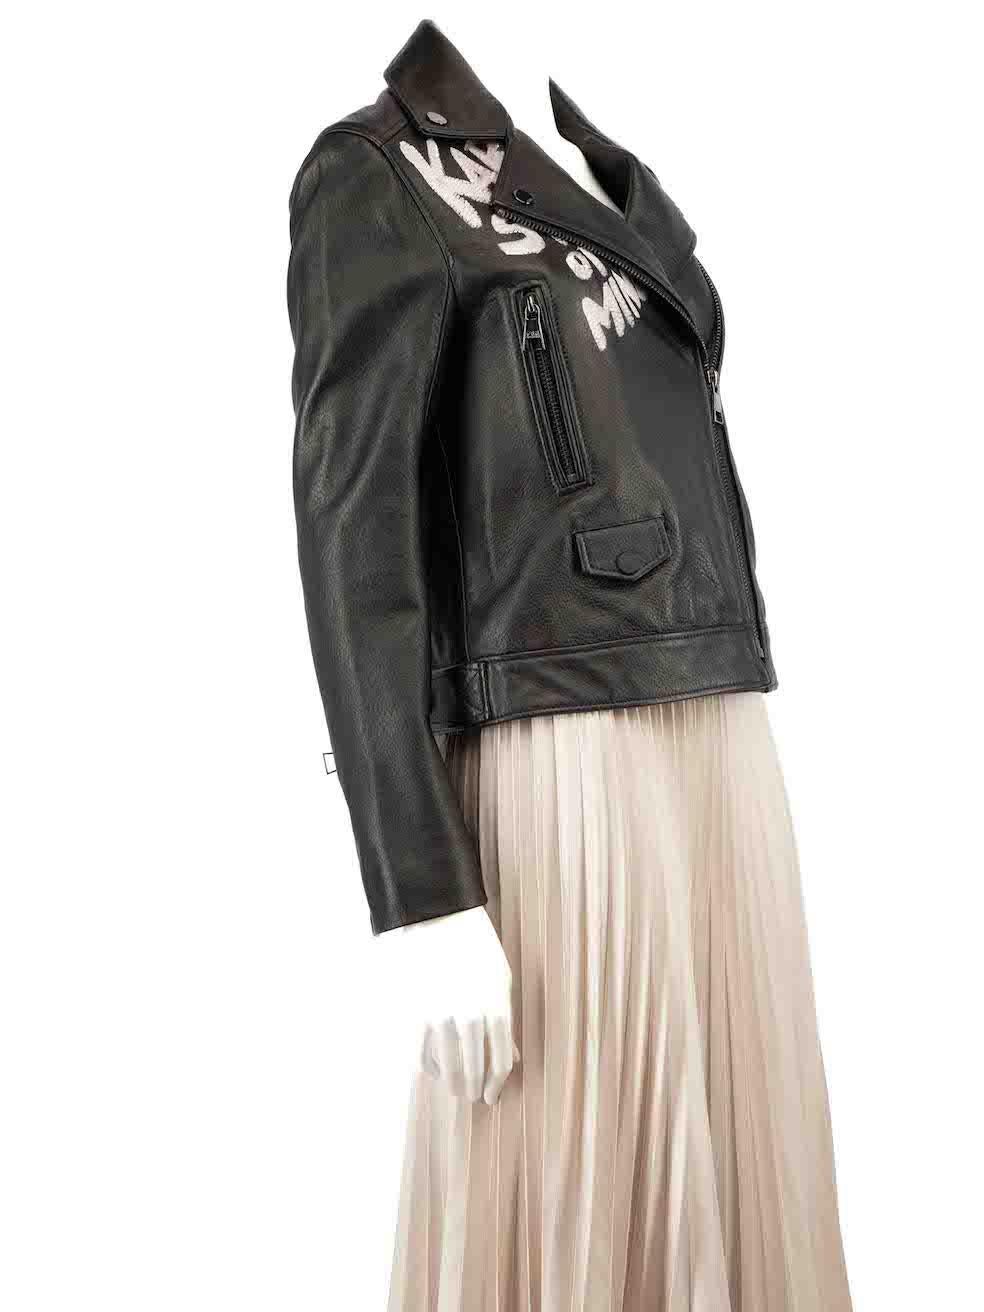 CONDITION is Very good. Hardly any visible wear to jacket is evident on this used Karl Lagerfeld designer resale item.
 
 Details
 Black
 Leather
 Biker jacket
 Painted white lettering
 Asymmetric zip fastening
 Zipped cuffs
 4x Front pockets
 
 
